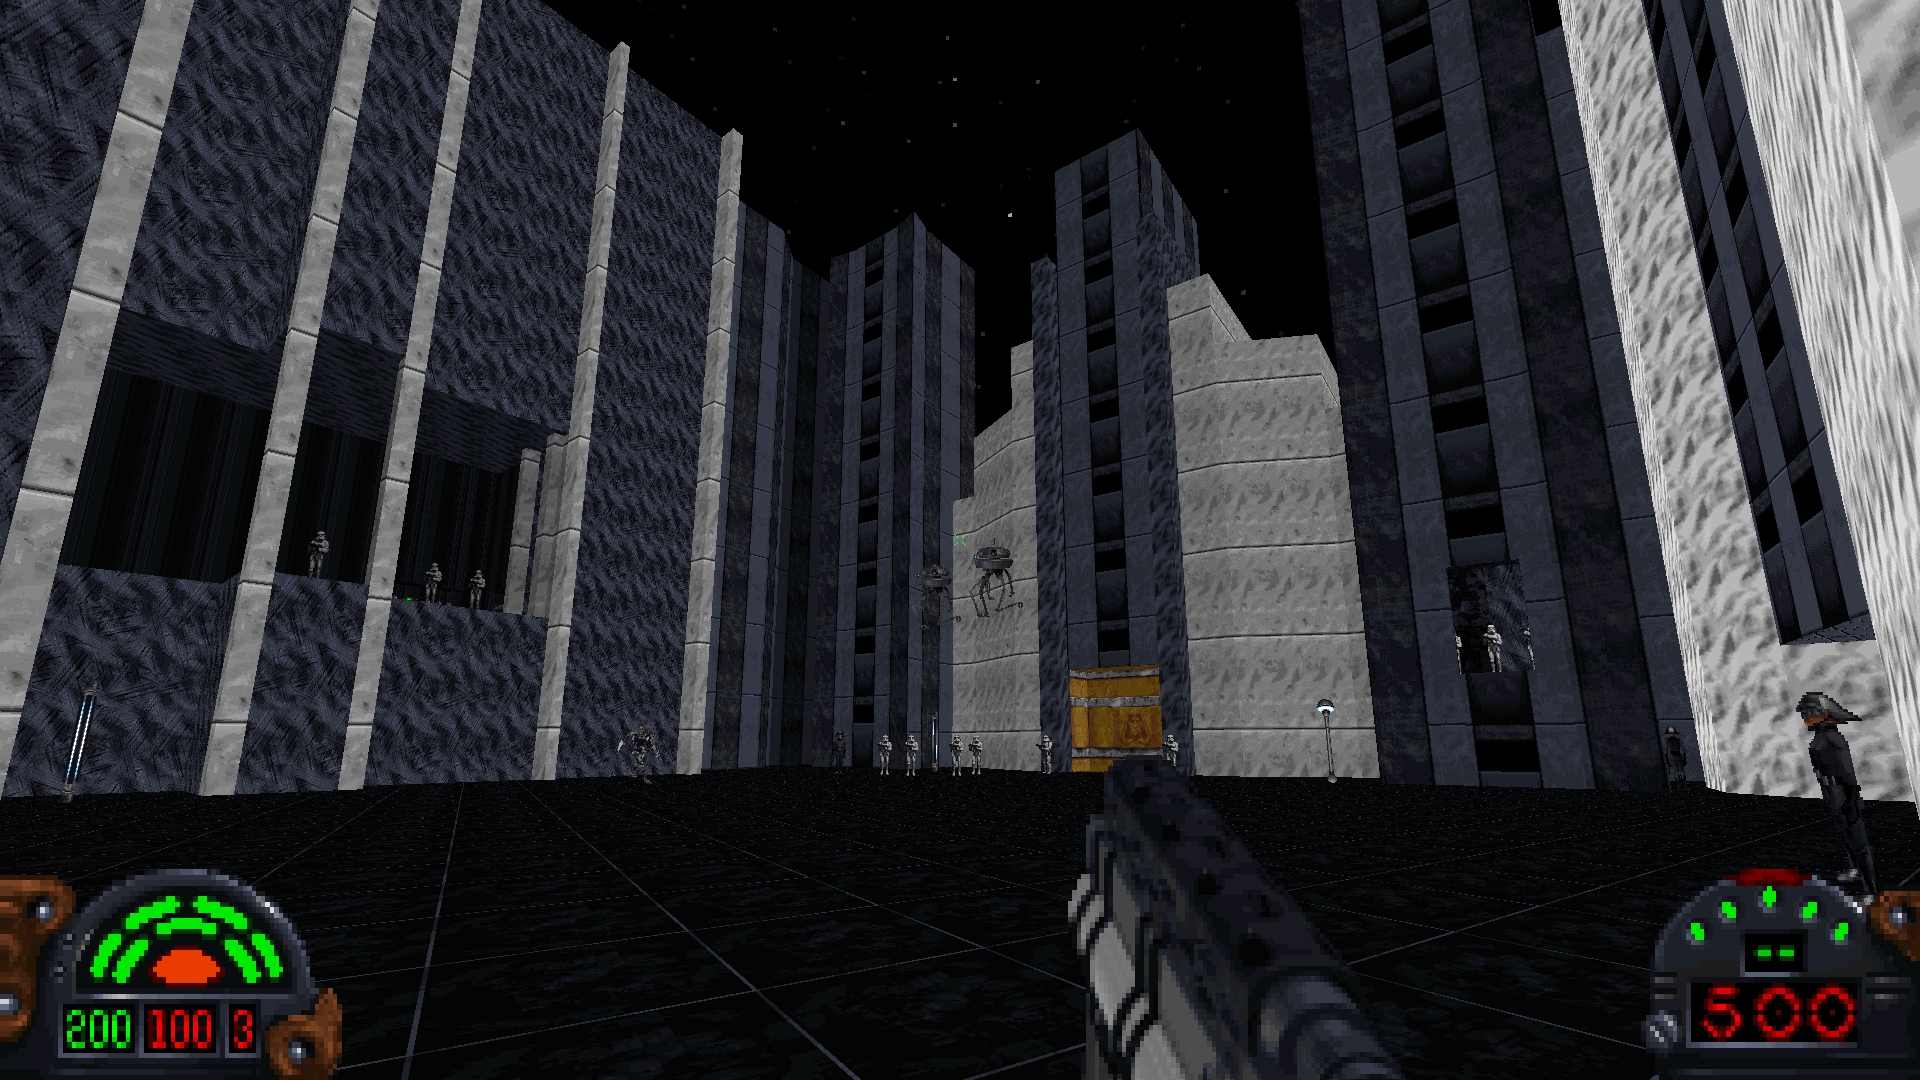 Looking upwards at buildings surrounded by Storm Troopers in Dark Forces